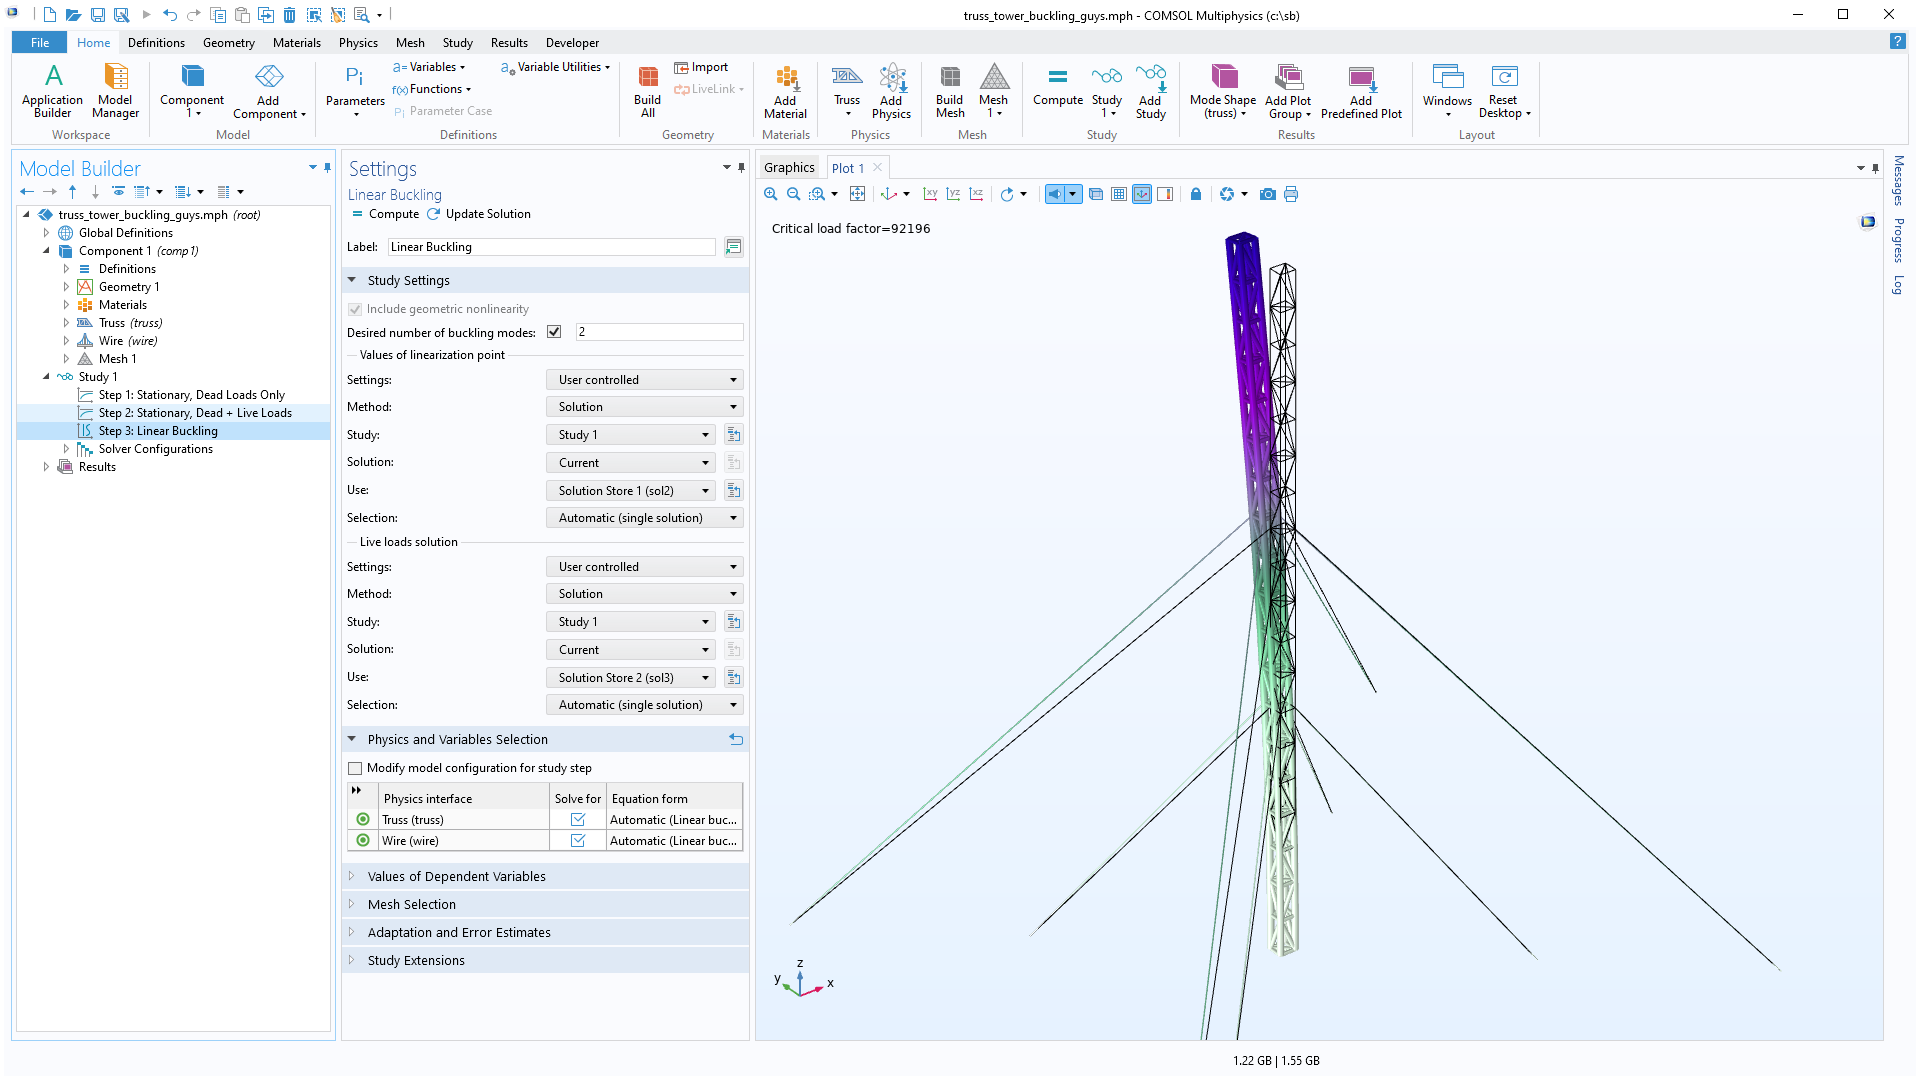 The COMSOL Multiphysics UI showing the Model Builder with the Linear Buckling node highlighted, the corresponding Settings window, and a truss tower model in the Graphics window.